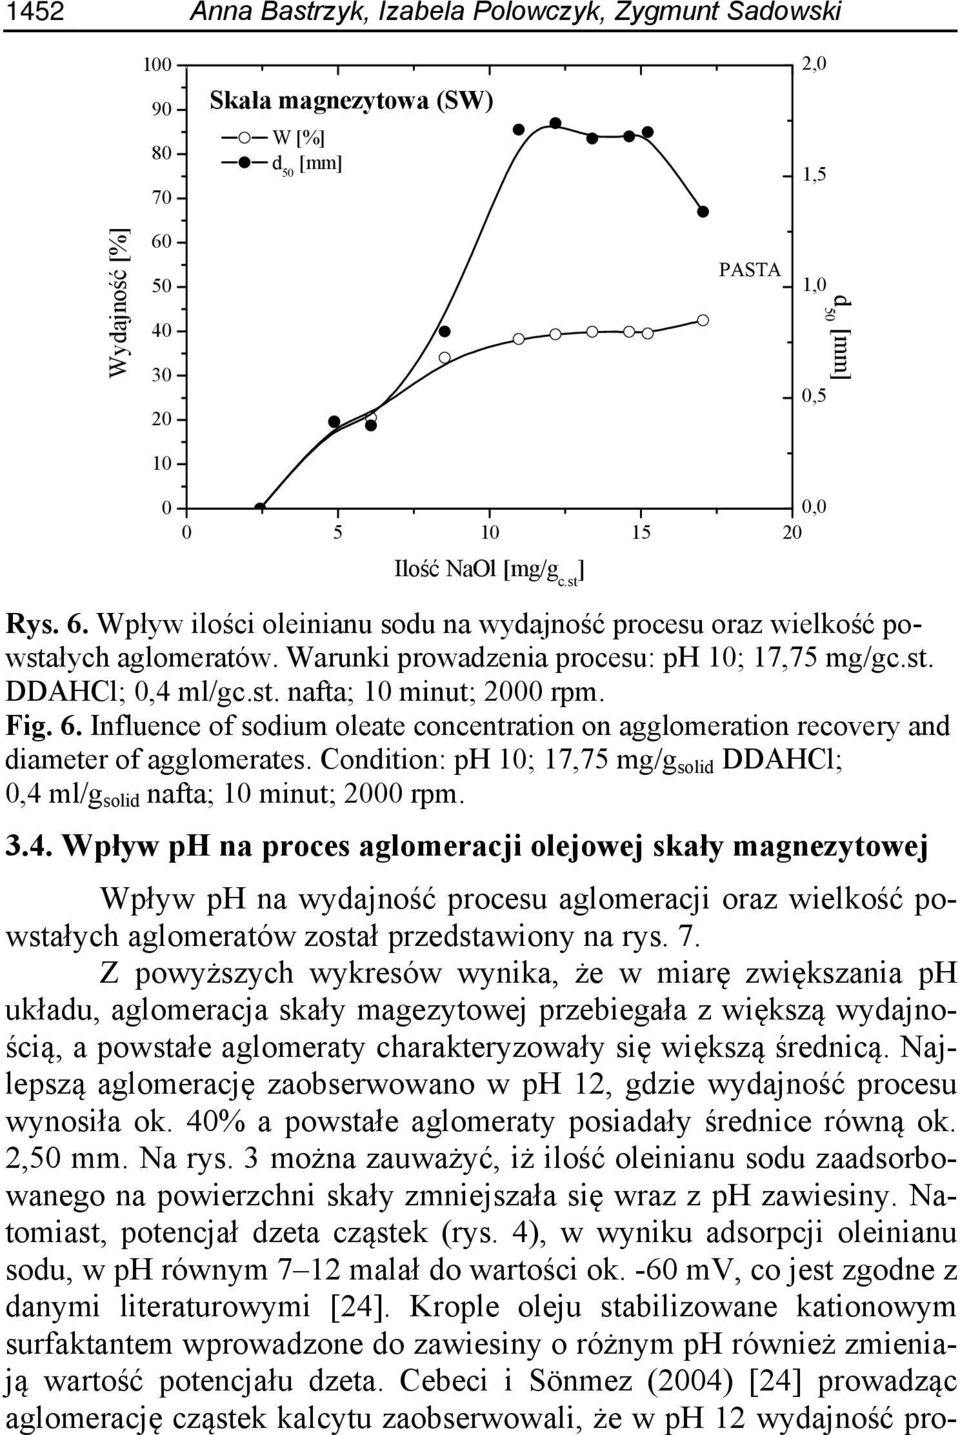 Fig. 6. Influence of sodium oleate concentration on agglomeration recovery and diameter of agglomerates. Condition: ph 10; 17,75 mg/g solid DDAHCl; 0,4 